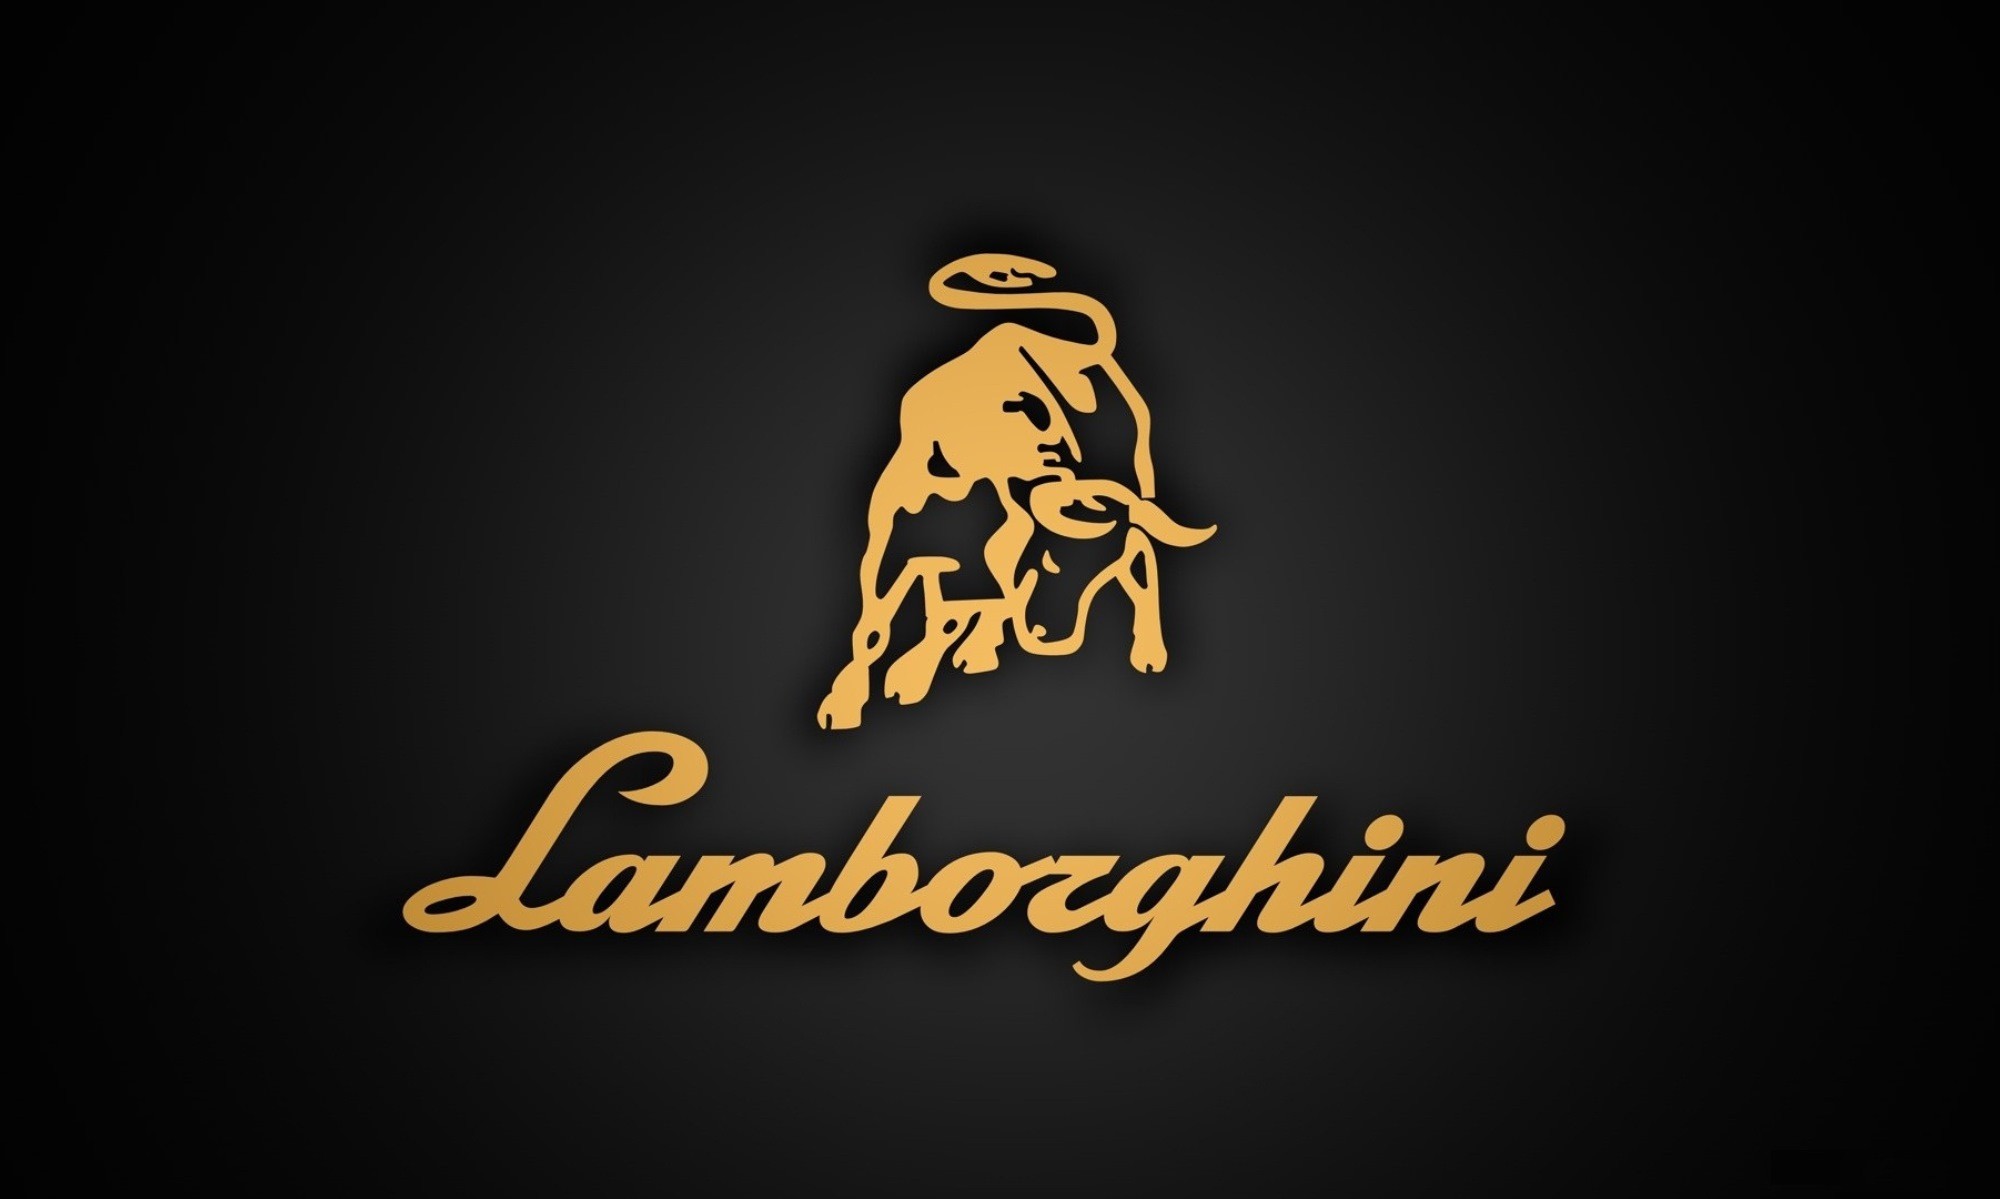 There is a new Lamborghini distributor is South Africa